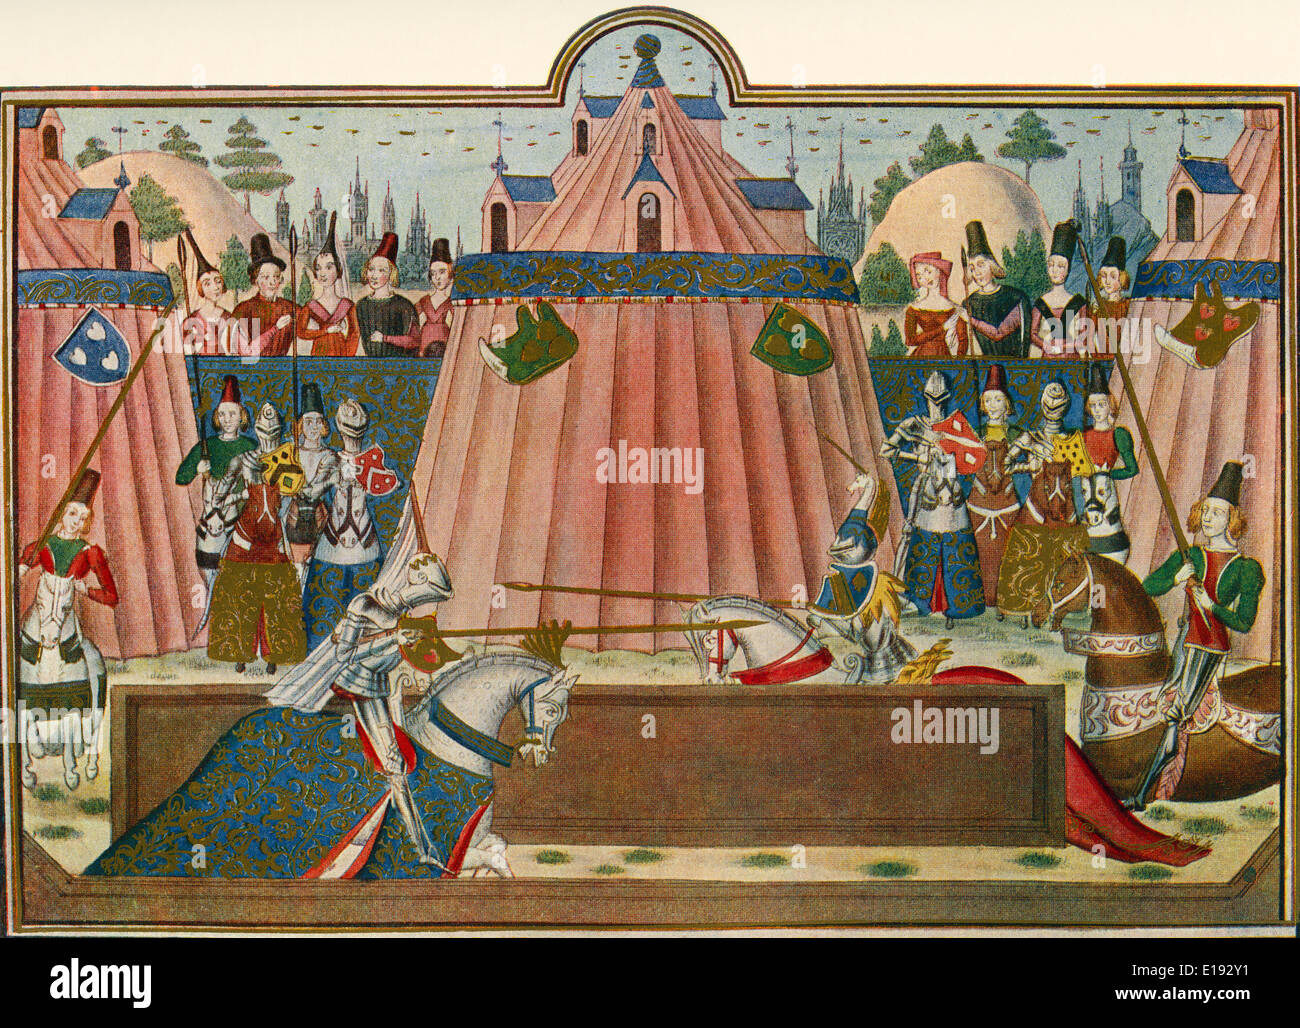 Tournament at St. Inglevere, near Calais, France, c.1380. Stock Photo